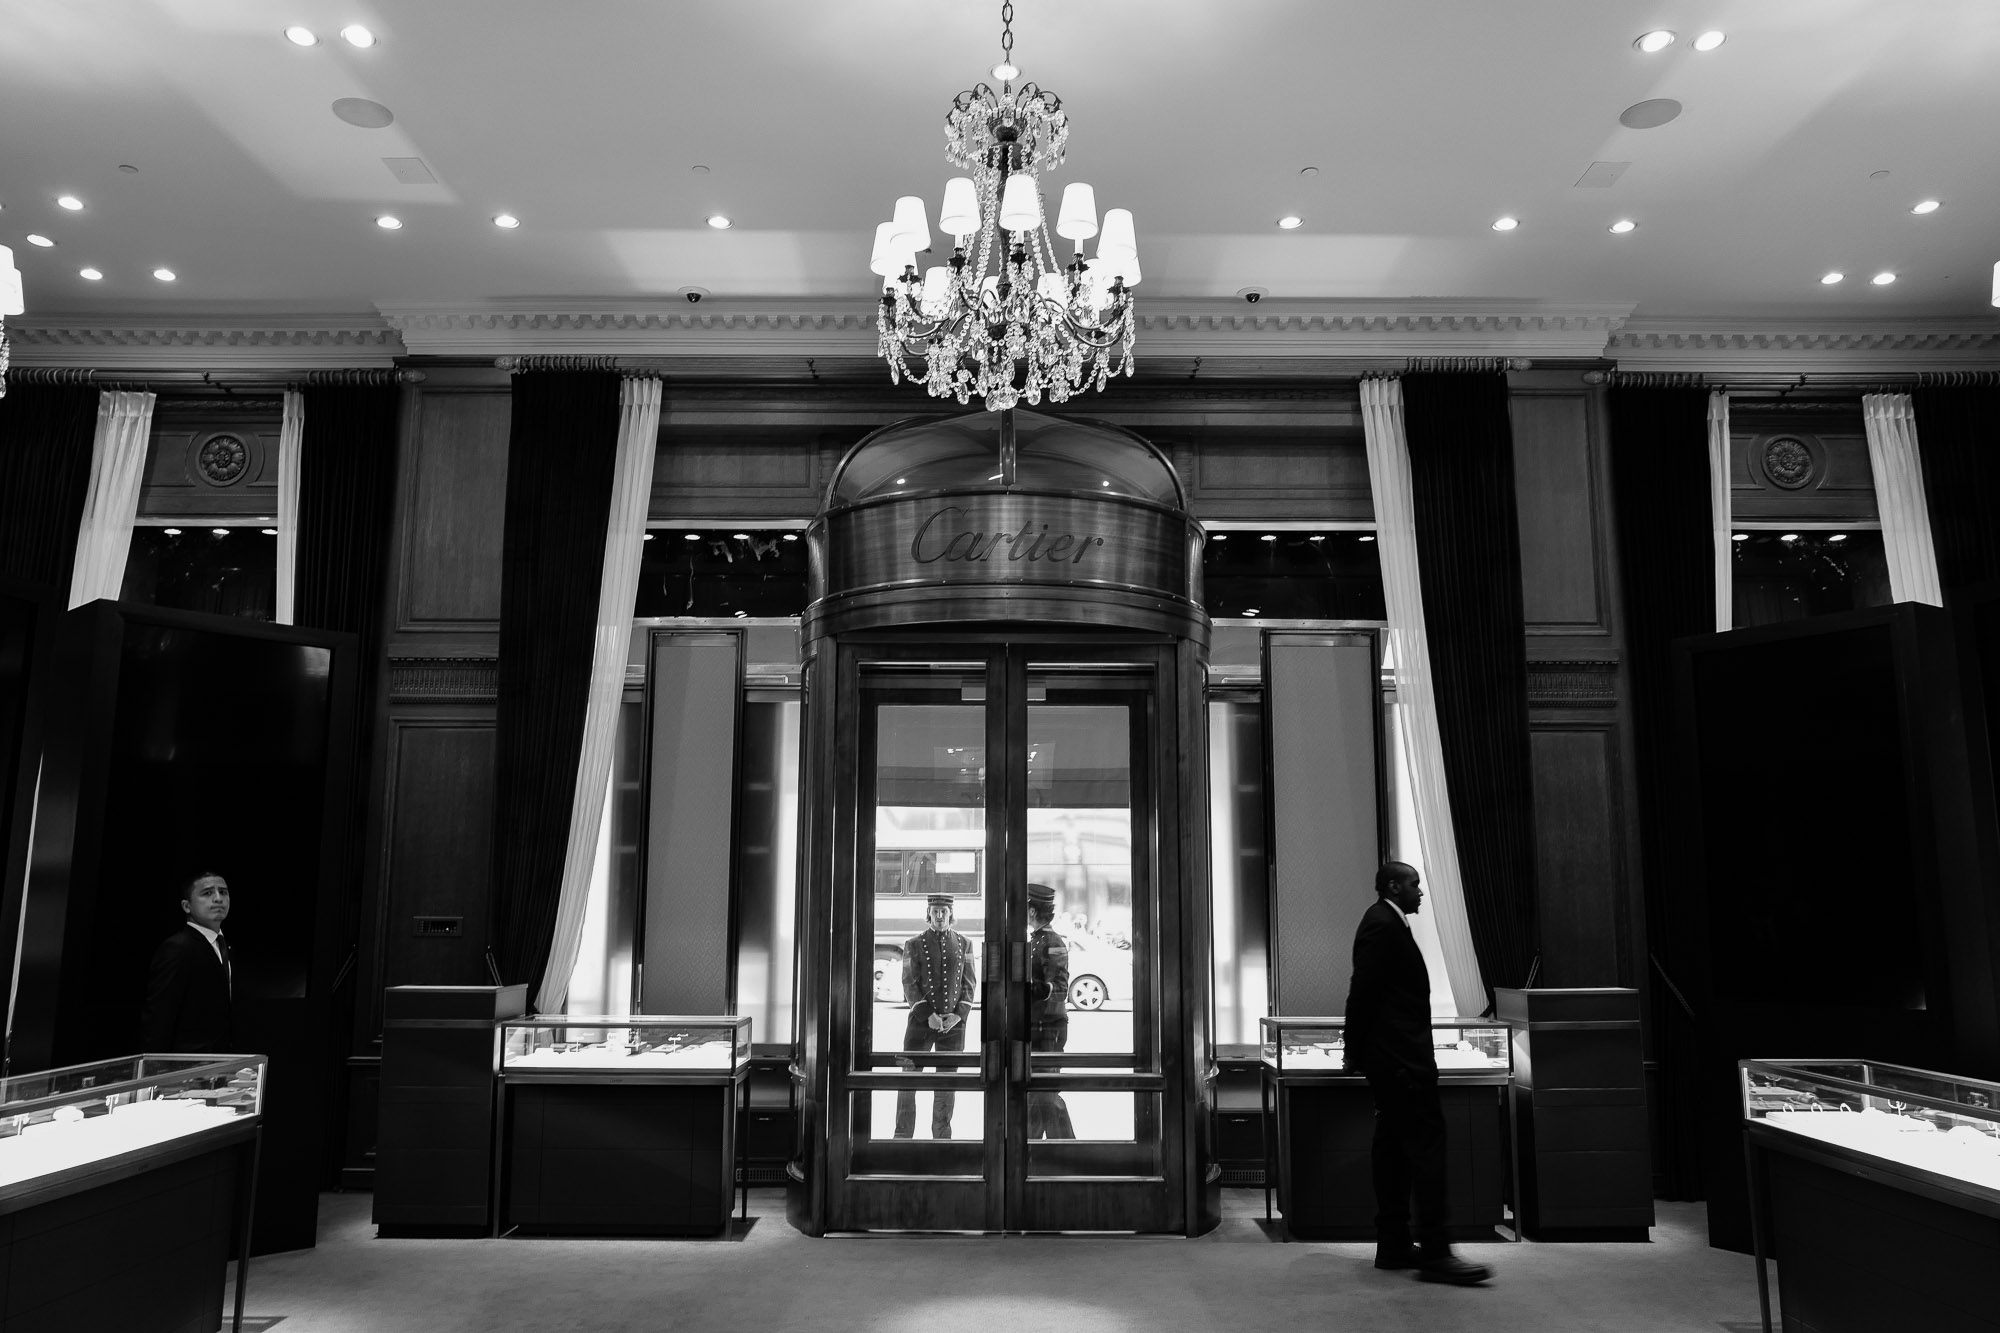 Explore Cartier's Newly Redesigned Maisons in New York and Paris - Galerie